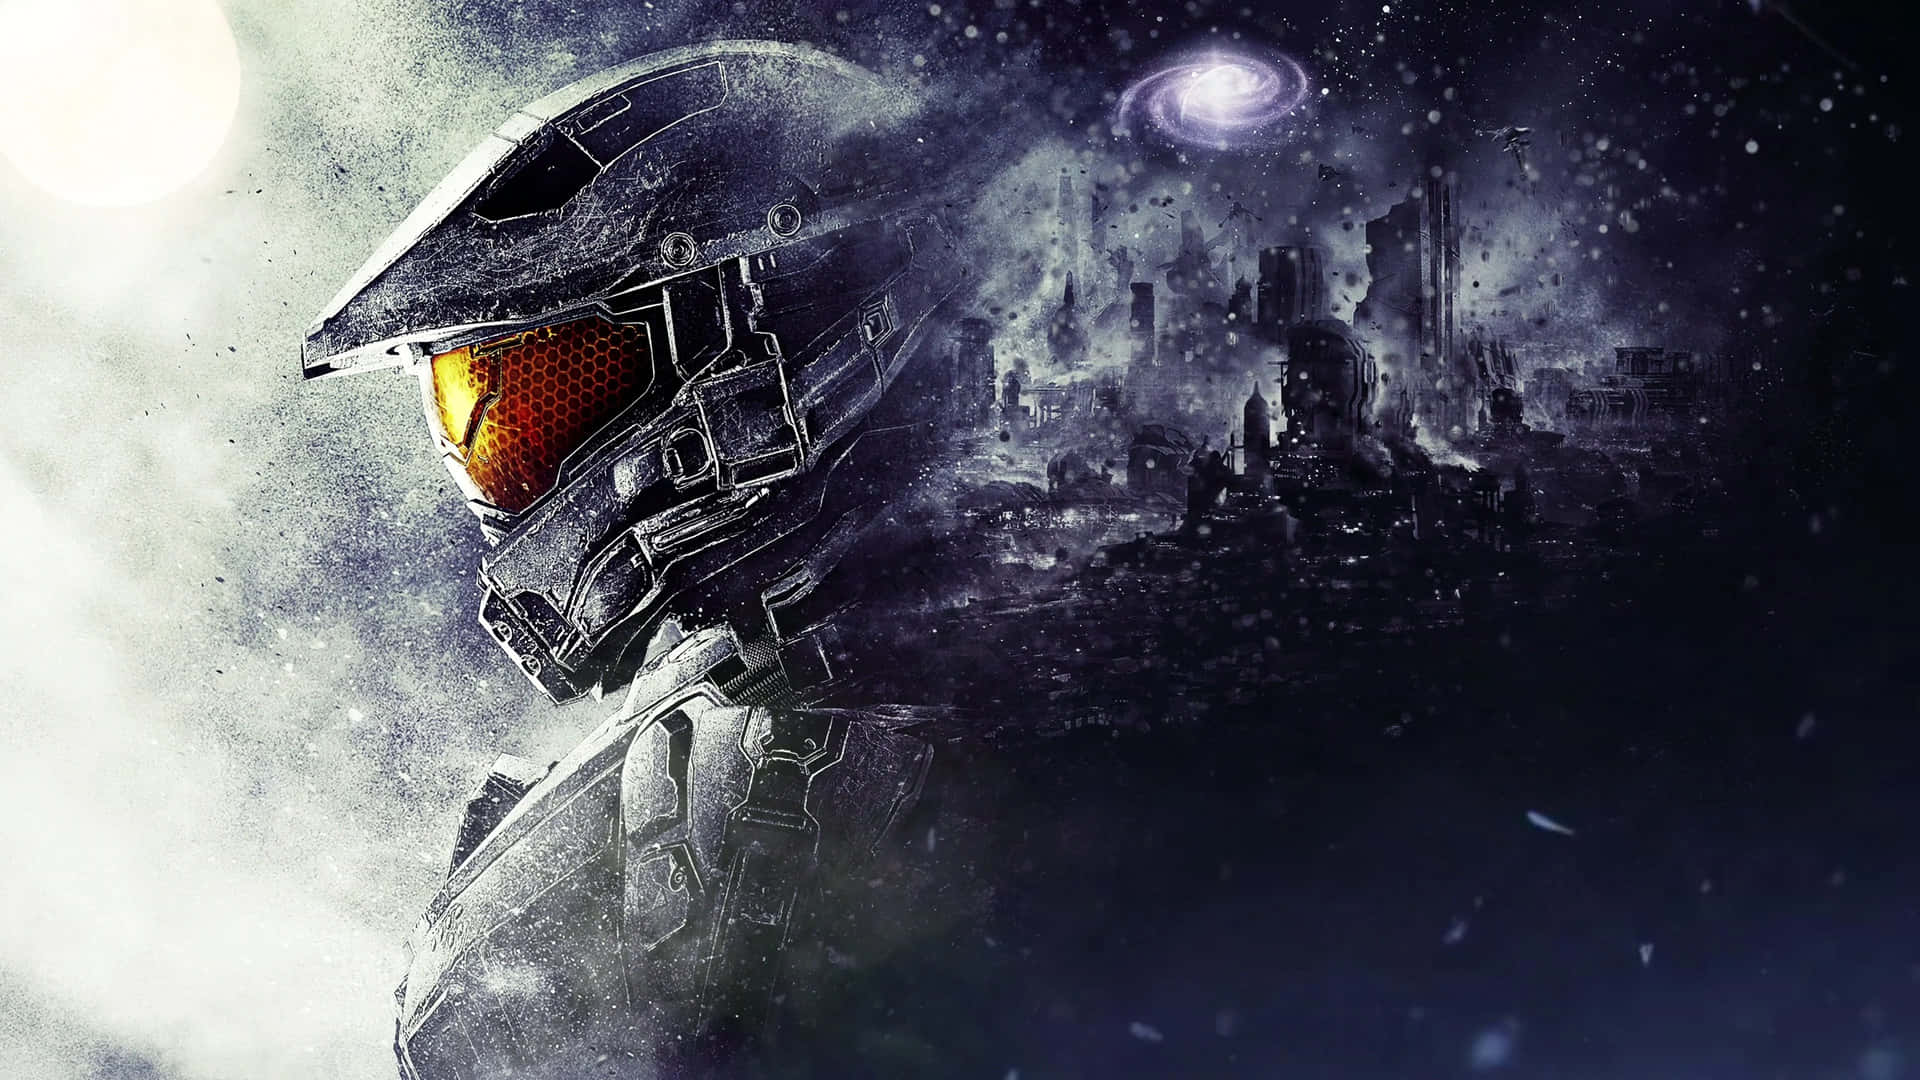 Master Chief in the Fight for Humanity